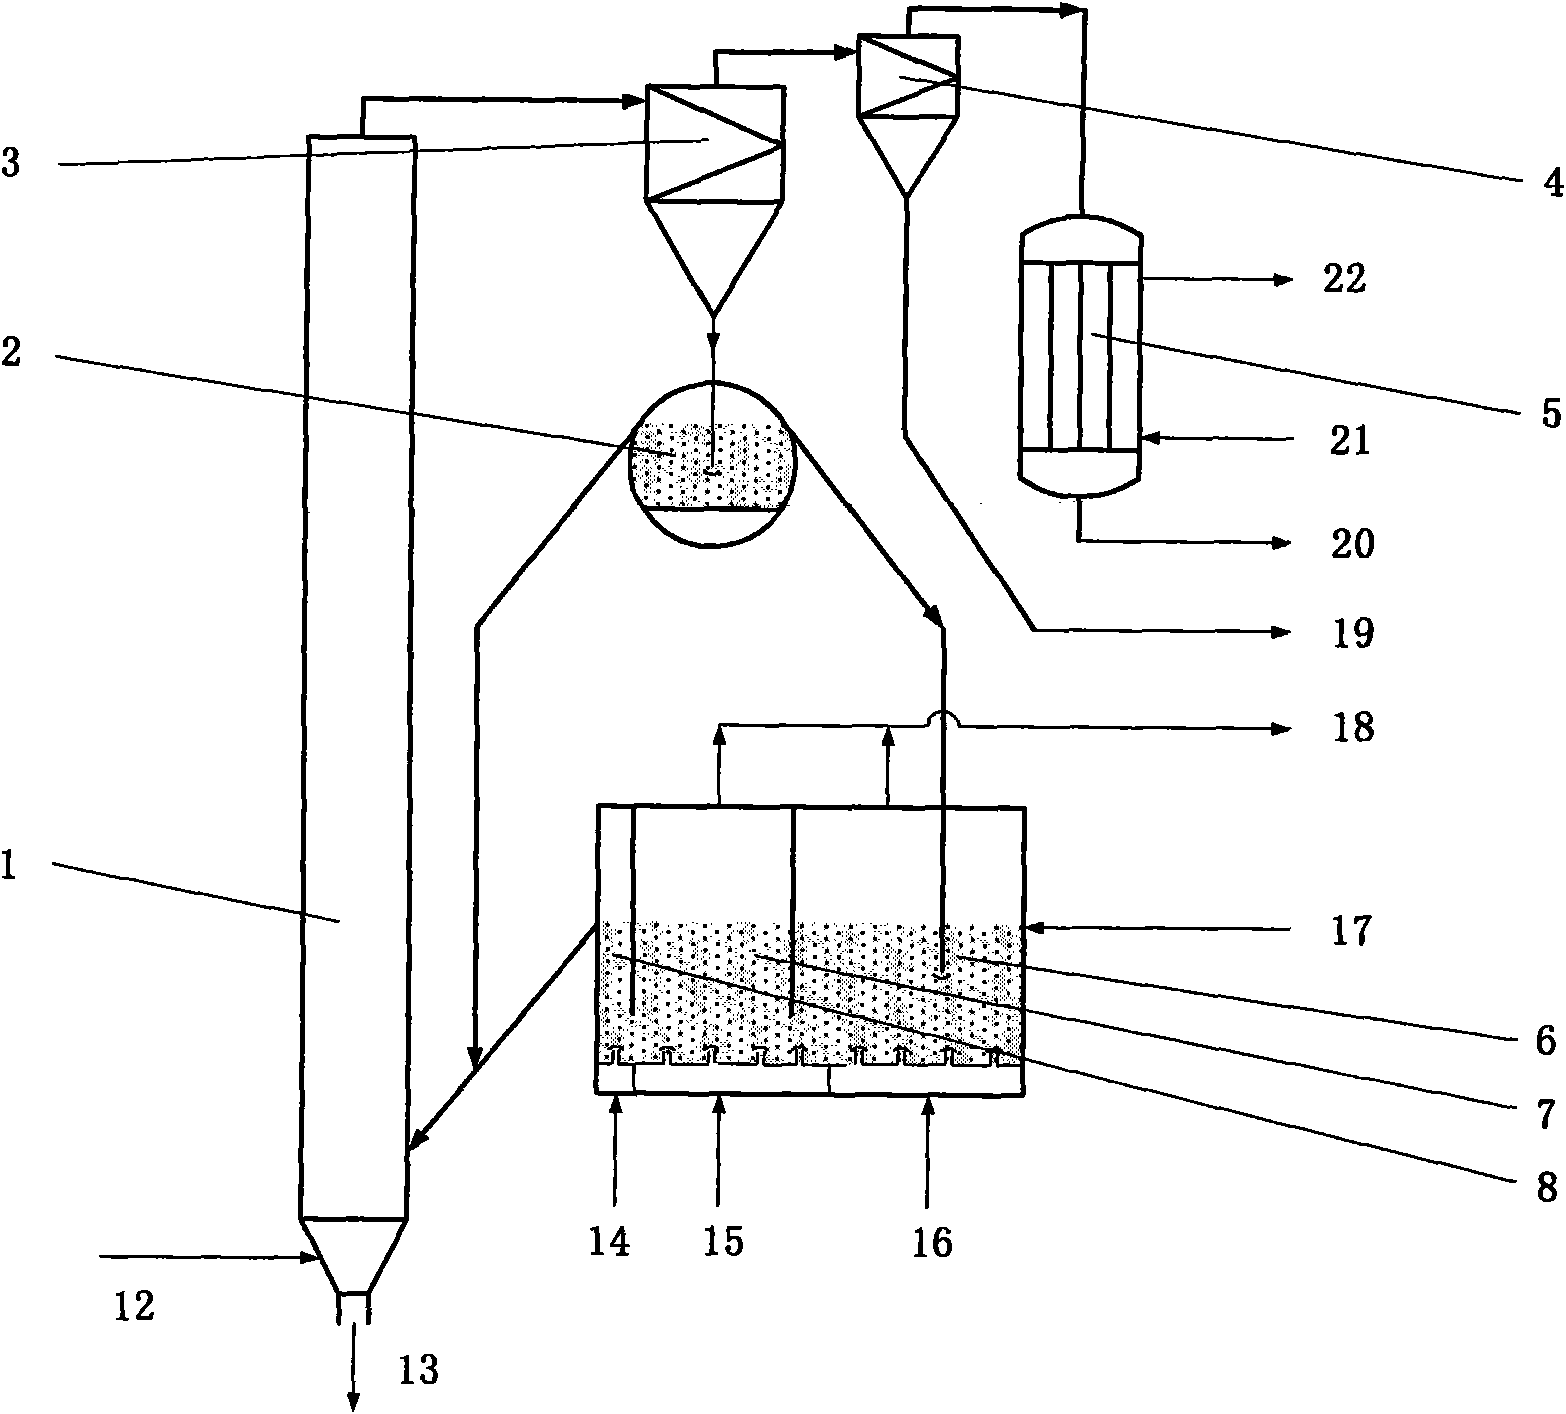 Processing method and apparatus for converting heavy oil to light fractions